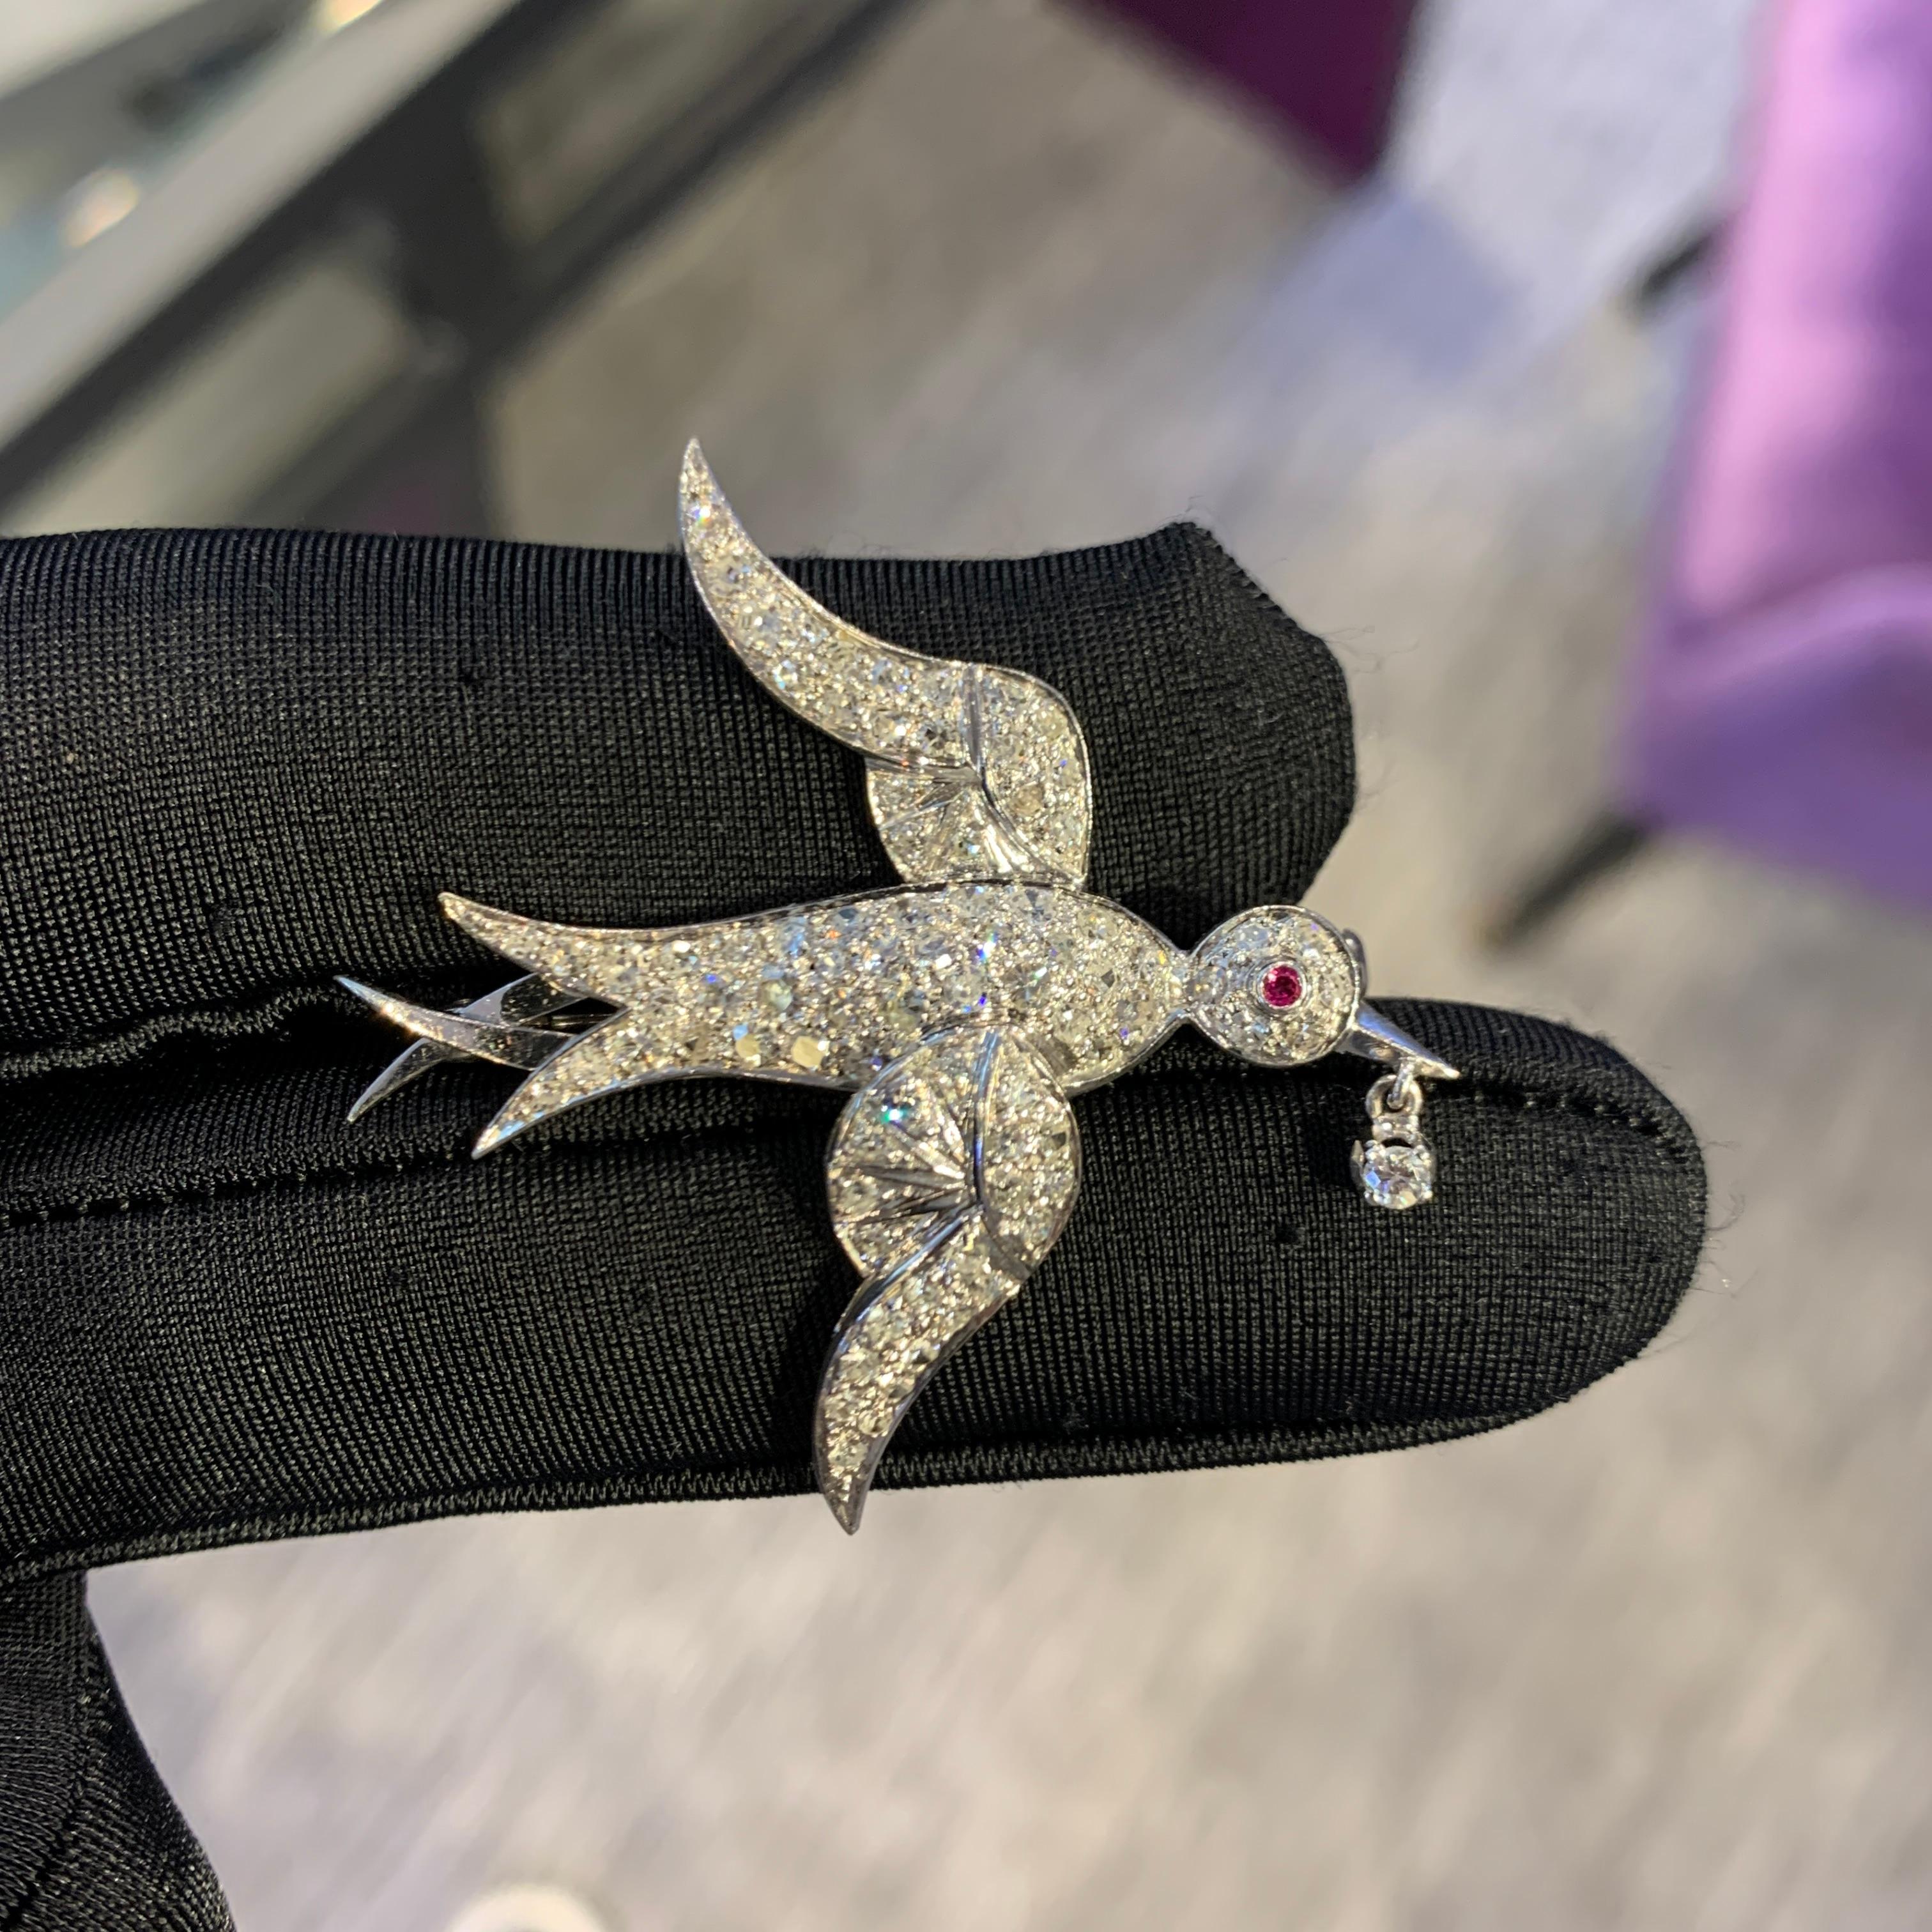 Diamond & Ruby Dove Brooch

A platinum brooch in the shape of a dove set with 84 round cut diamonds and a round cut ruby as its eye

Total Approximate Diamond Weight: 1.7 carats

Measurements: 1.75